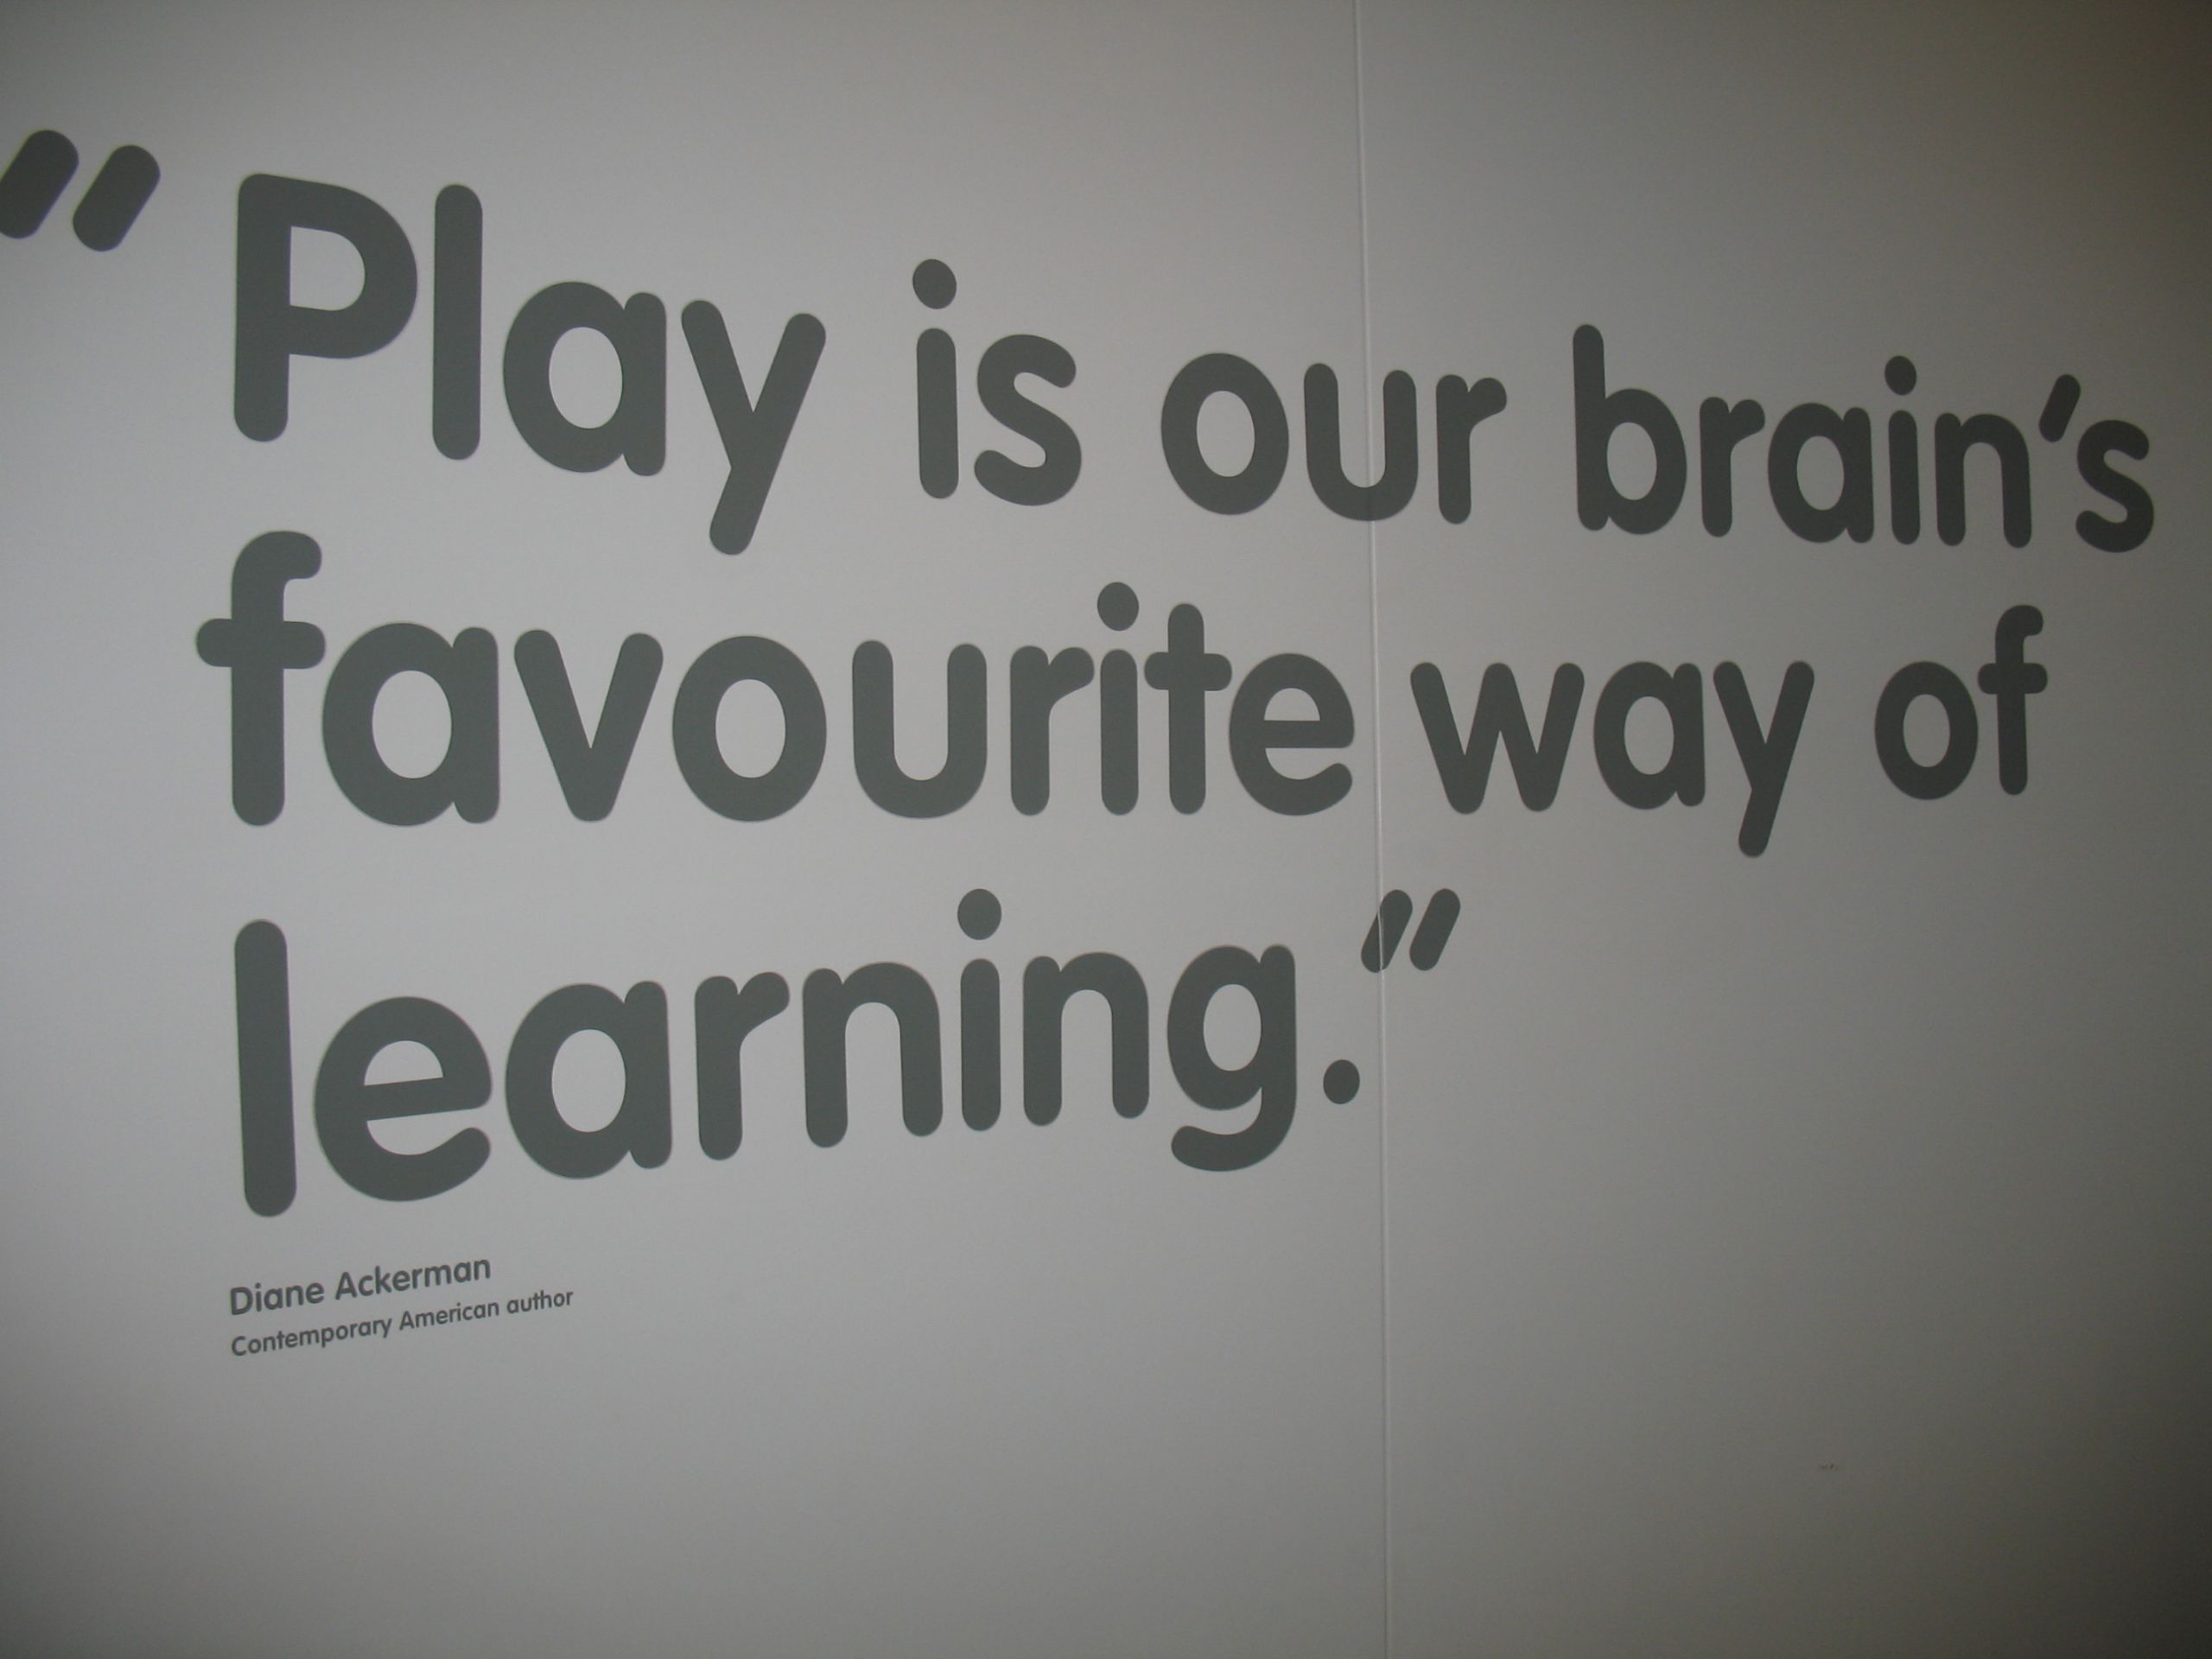 Kids Quotes About Learning
 Quotes about Learning through play 18 quotes